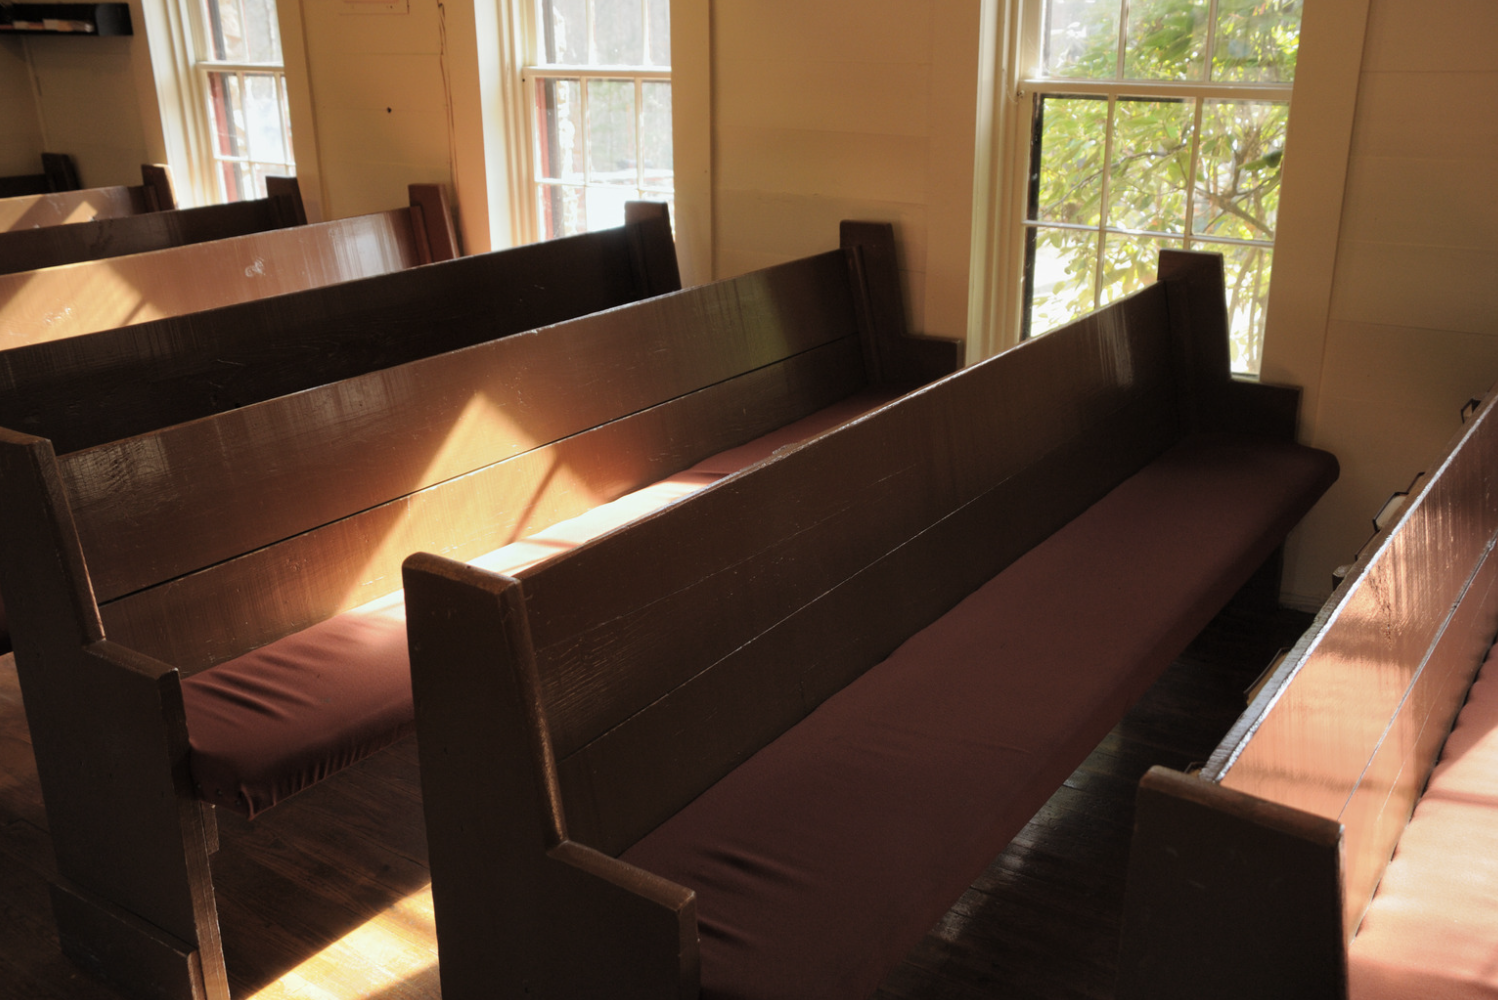 A picture of church pews in the morning sunshine